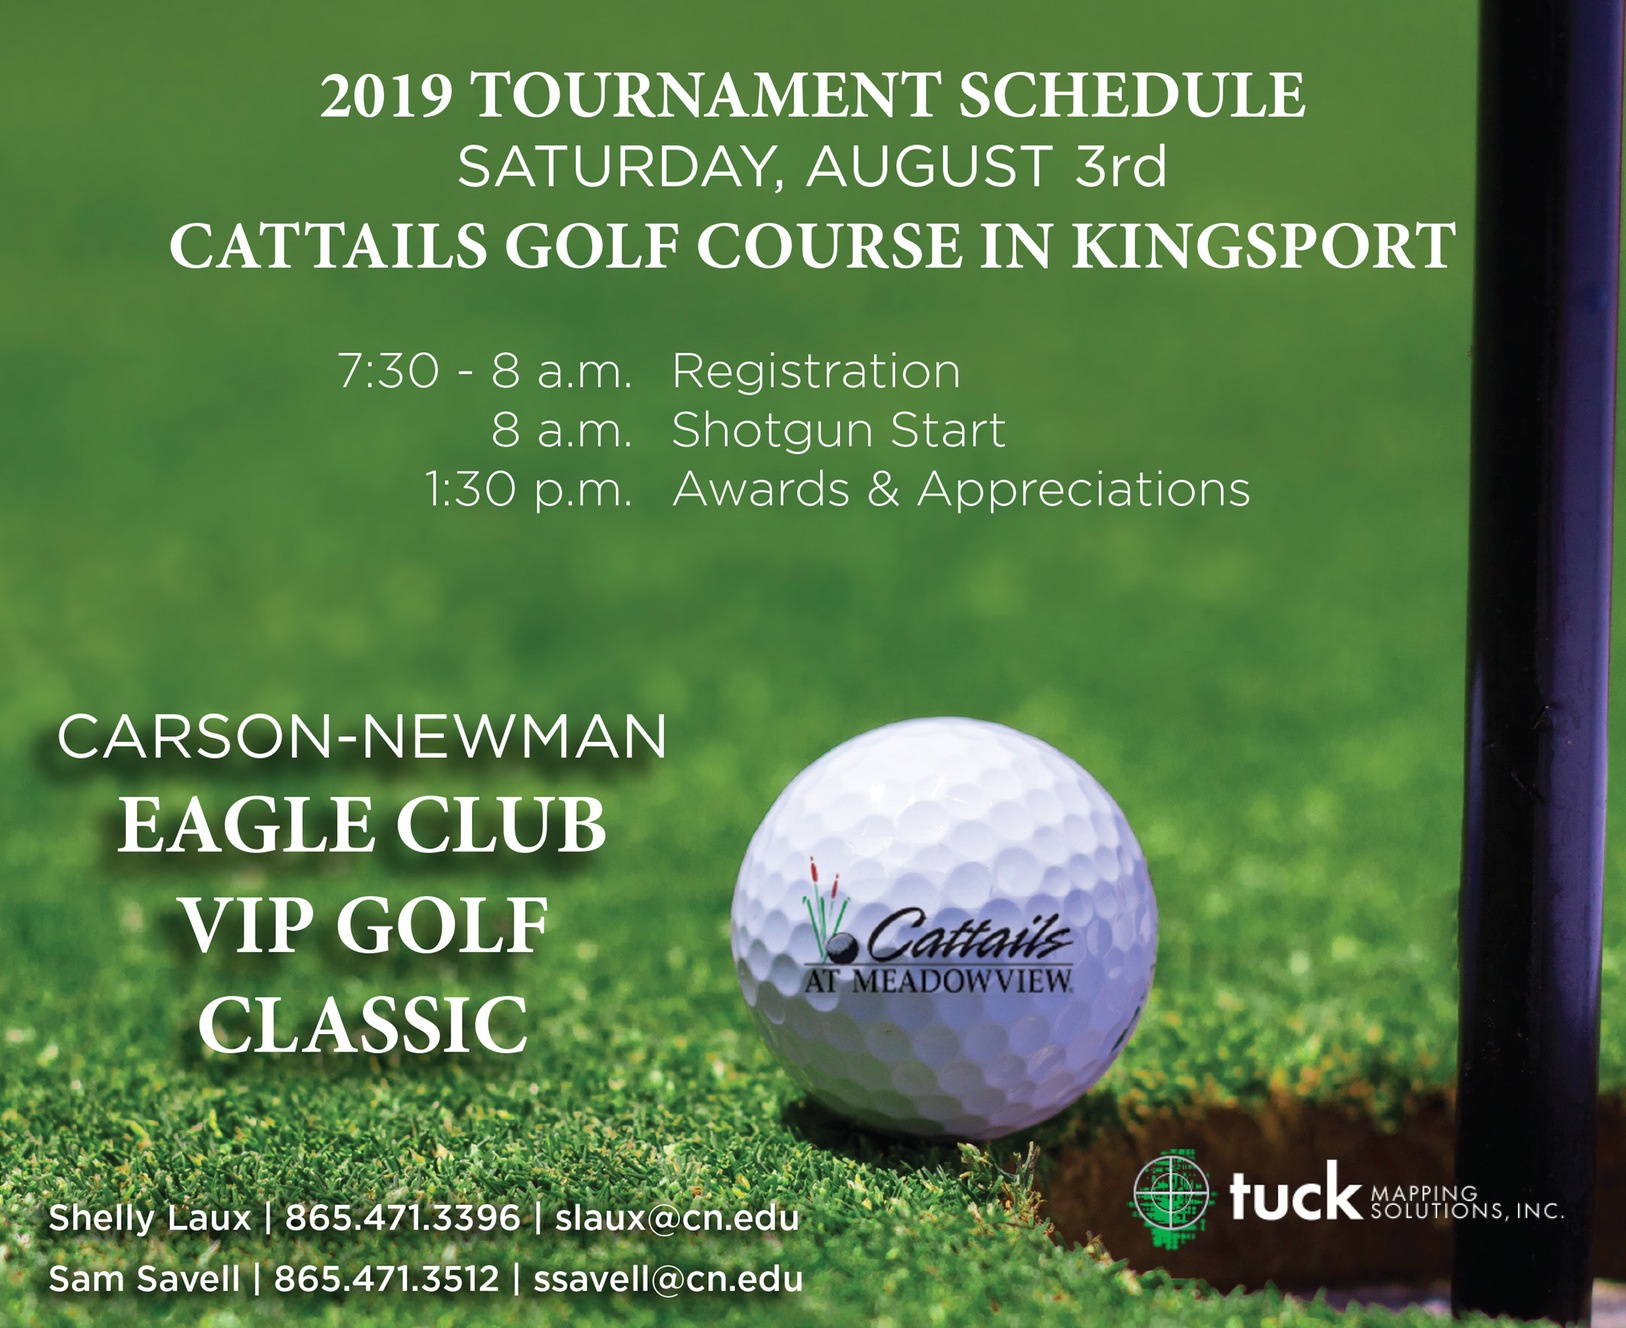 Eagle Club VIP Golf Classic set for Aug. 3 in Kingsport